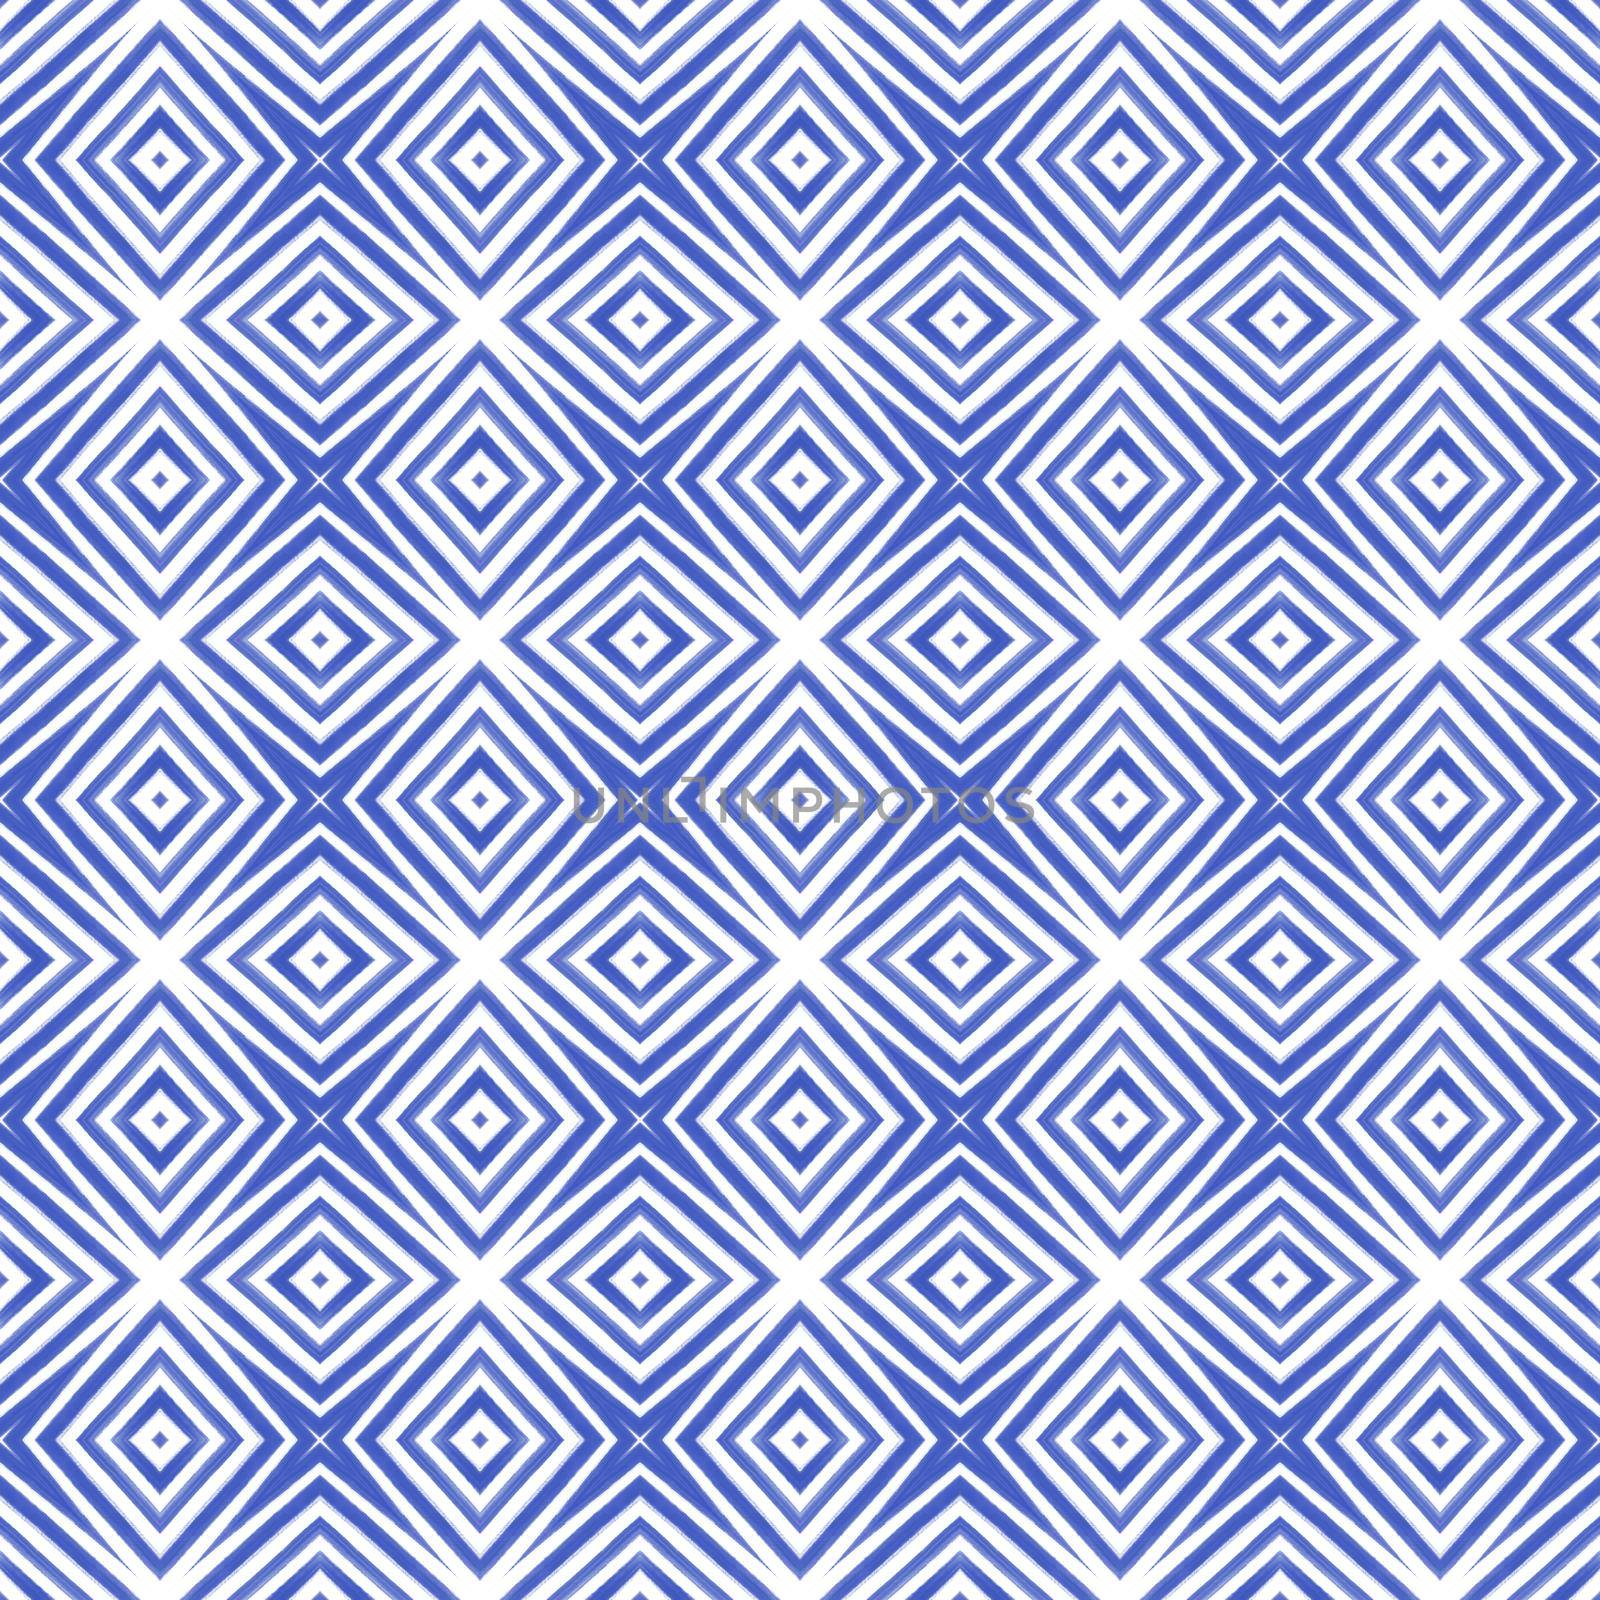 Tiled watercolor pattern. Indigo symmetrical kaleidoscope background. Textile ready terrific print, swimwear fabric, wallpaper, wrapping. Hand painted tiled watercolor seamless.